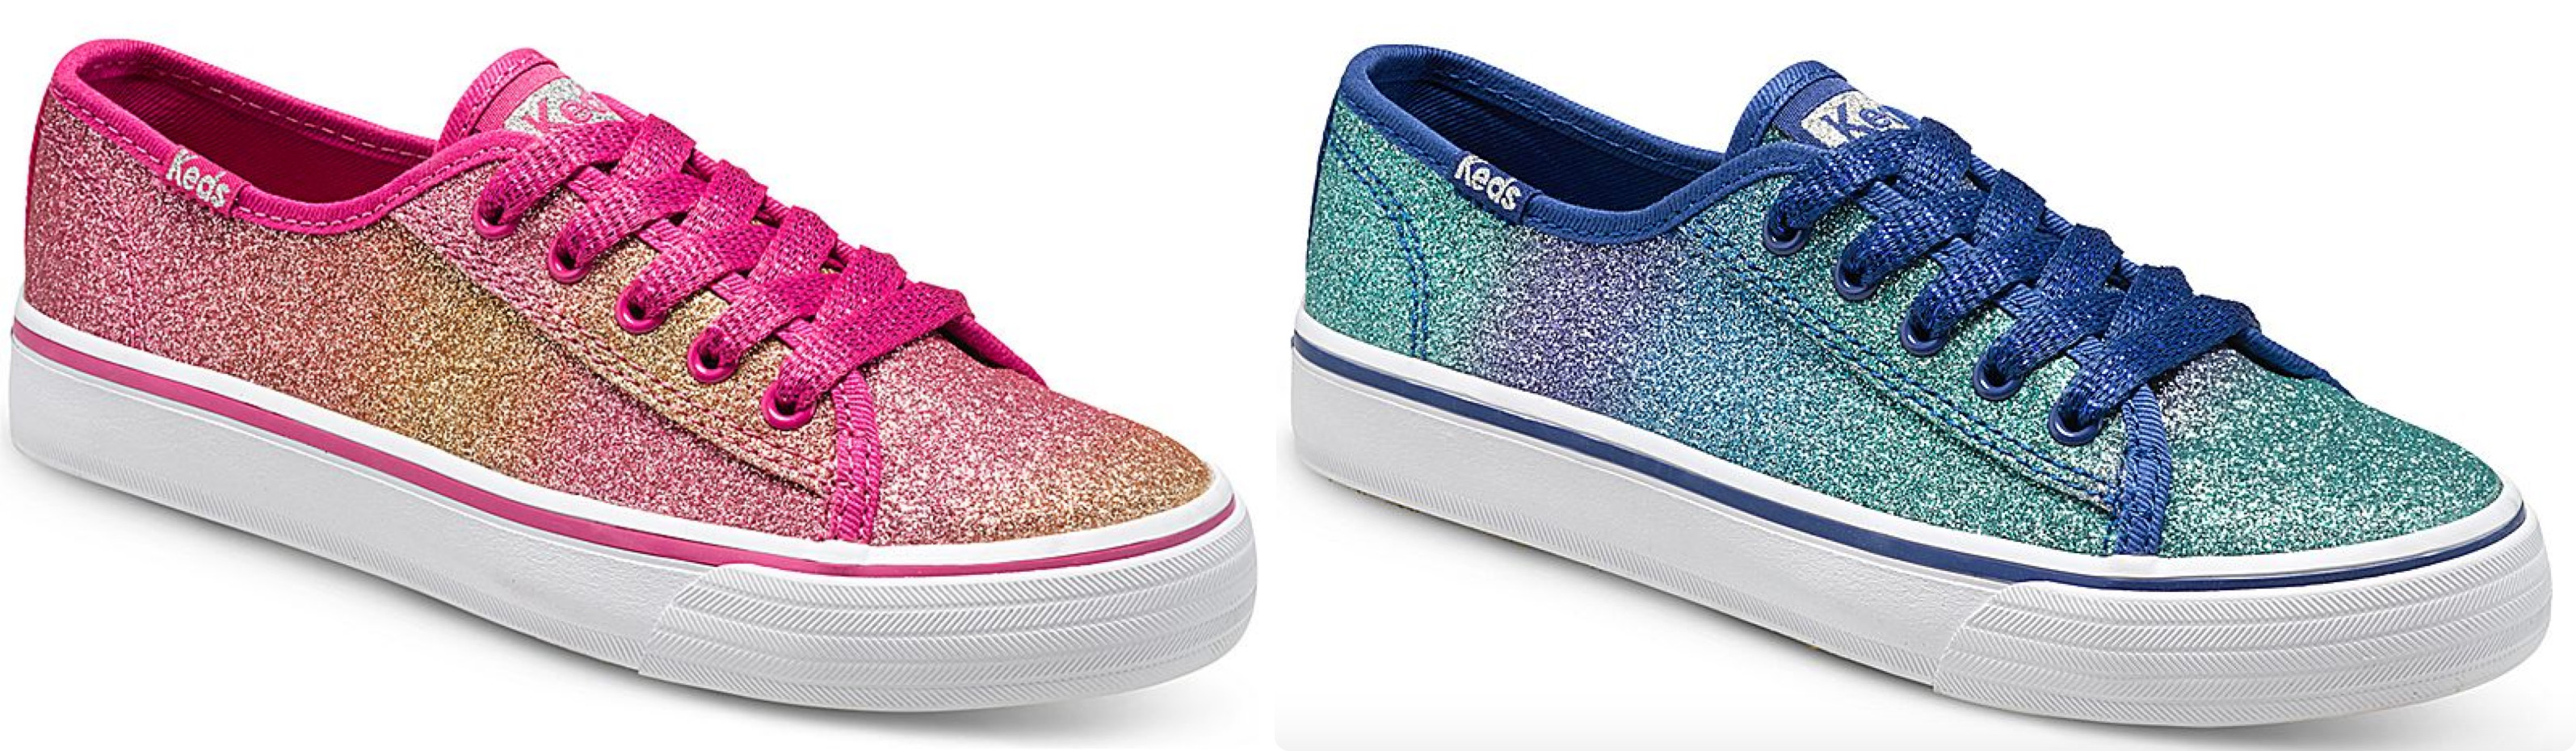 Stride Rite Off Clearance Free Shipping Keds Glitter Sneakers 12 76 Shipped Reg 40 Hip2save